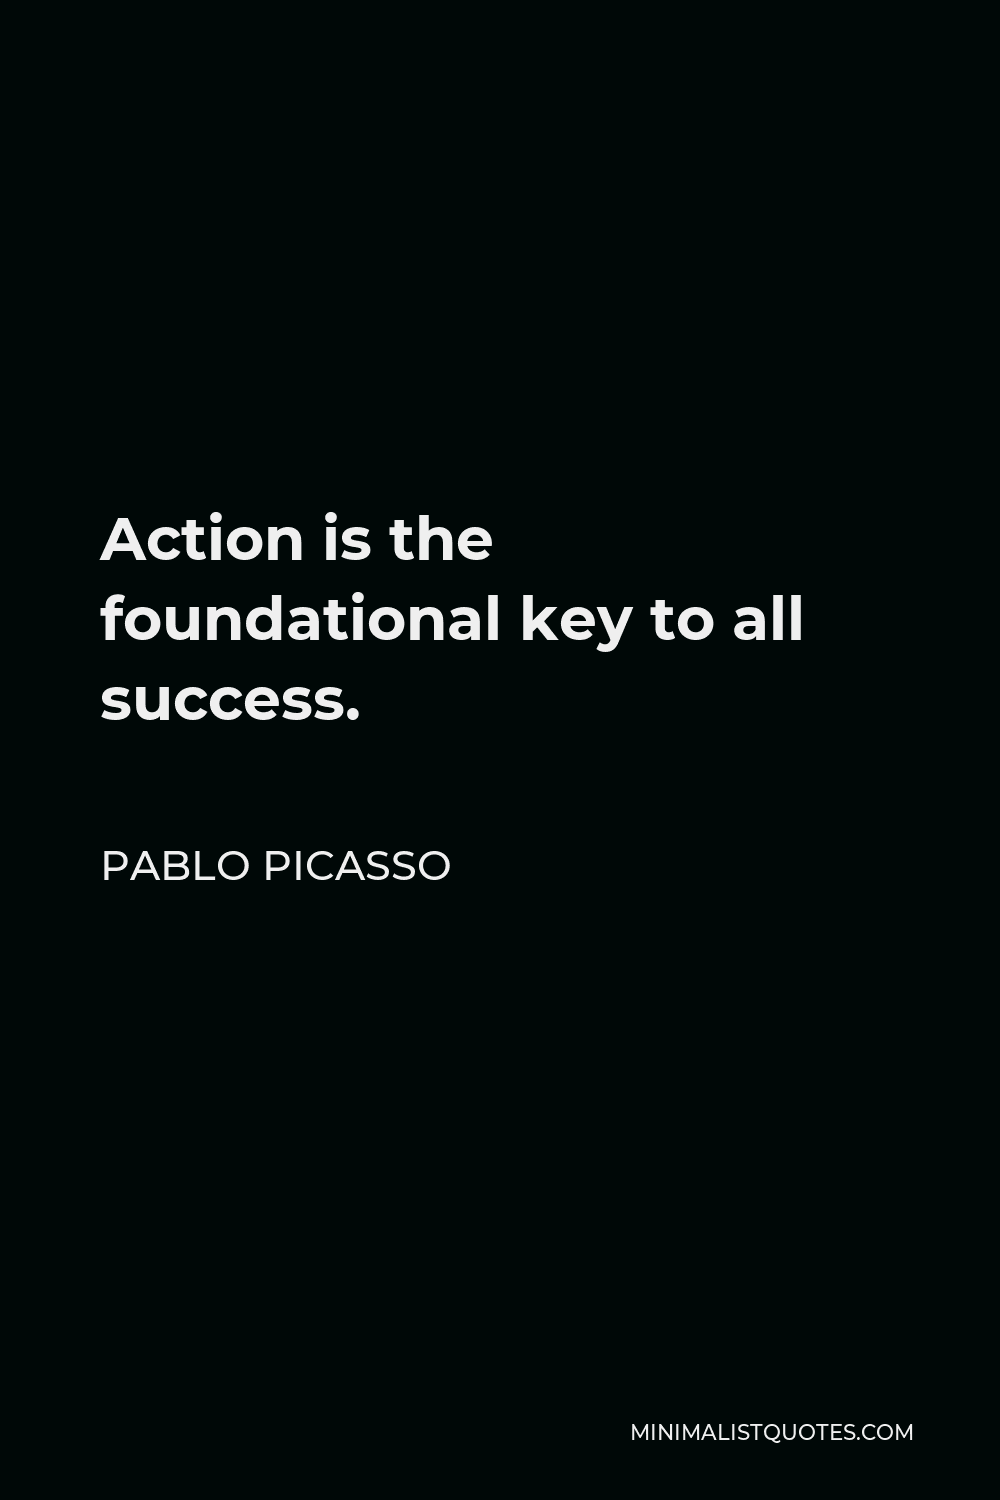 Pablo Picasso Quote: Action is the foundational key to all success.